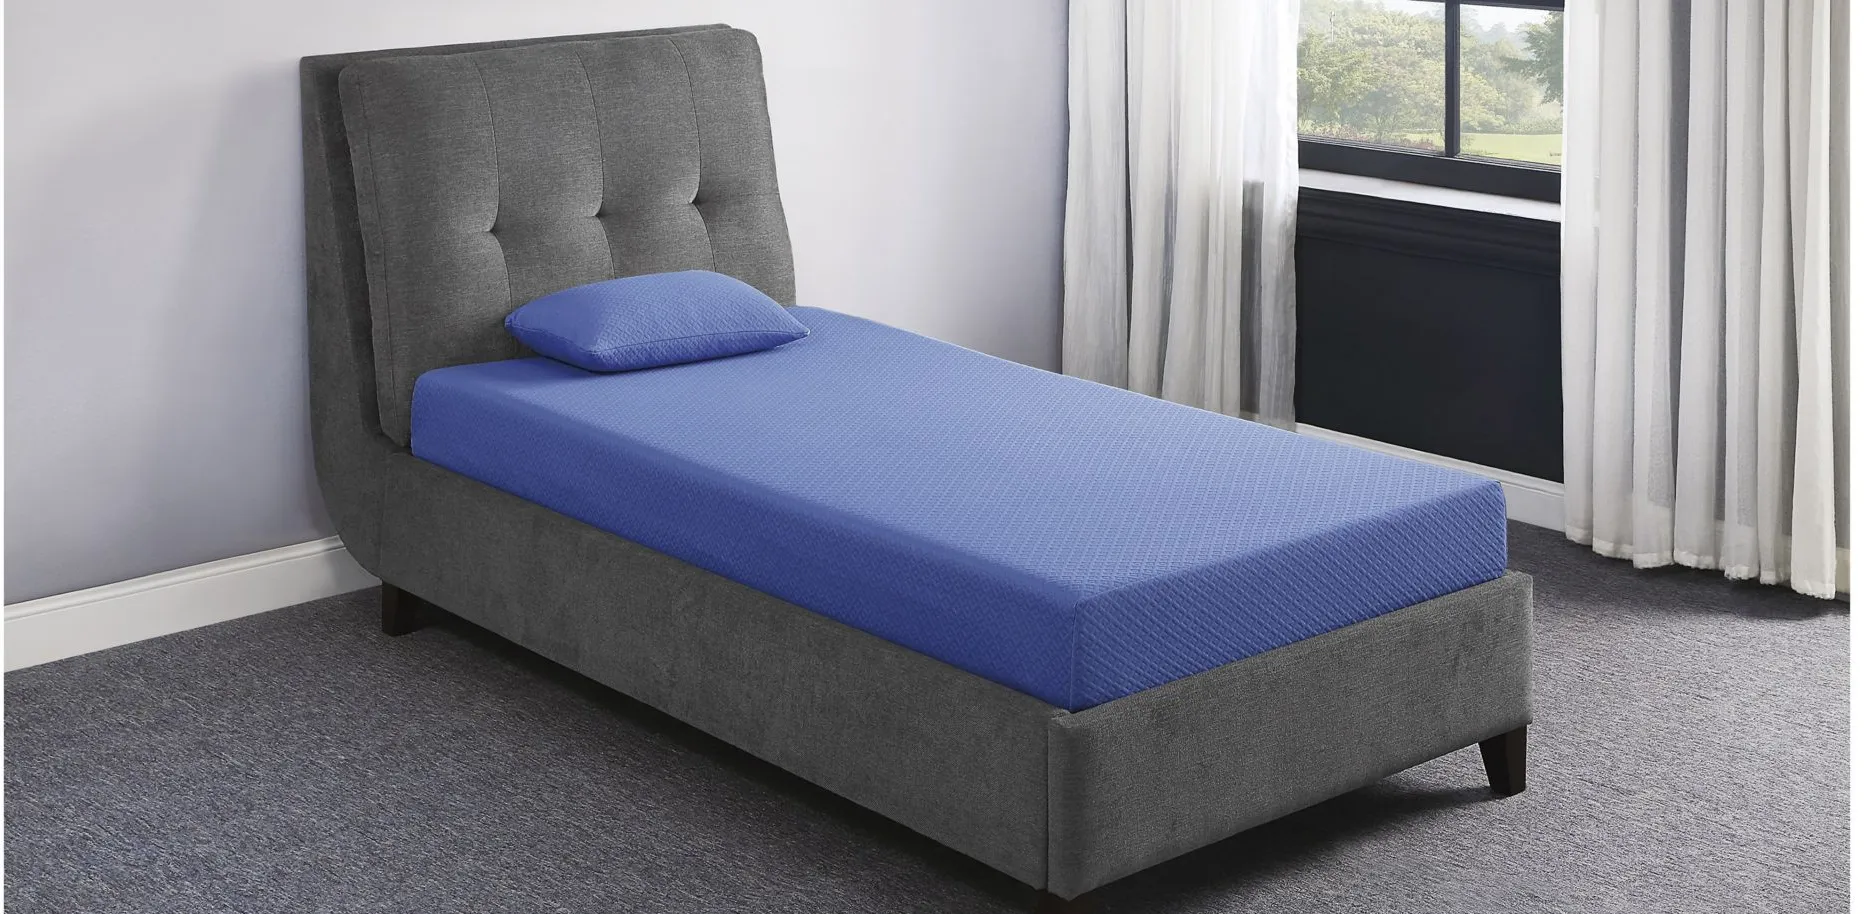 Nocturne 7" Blue Mattress with Pillow in Blue by Bellanest